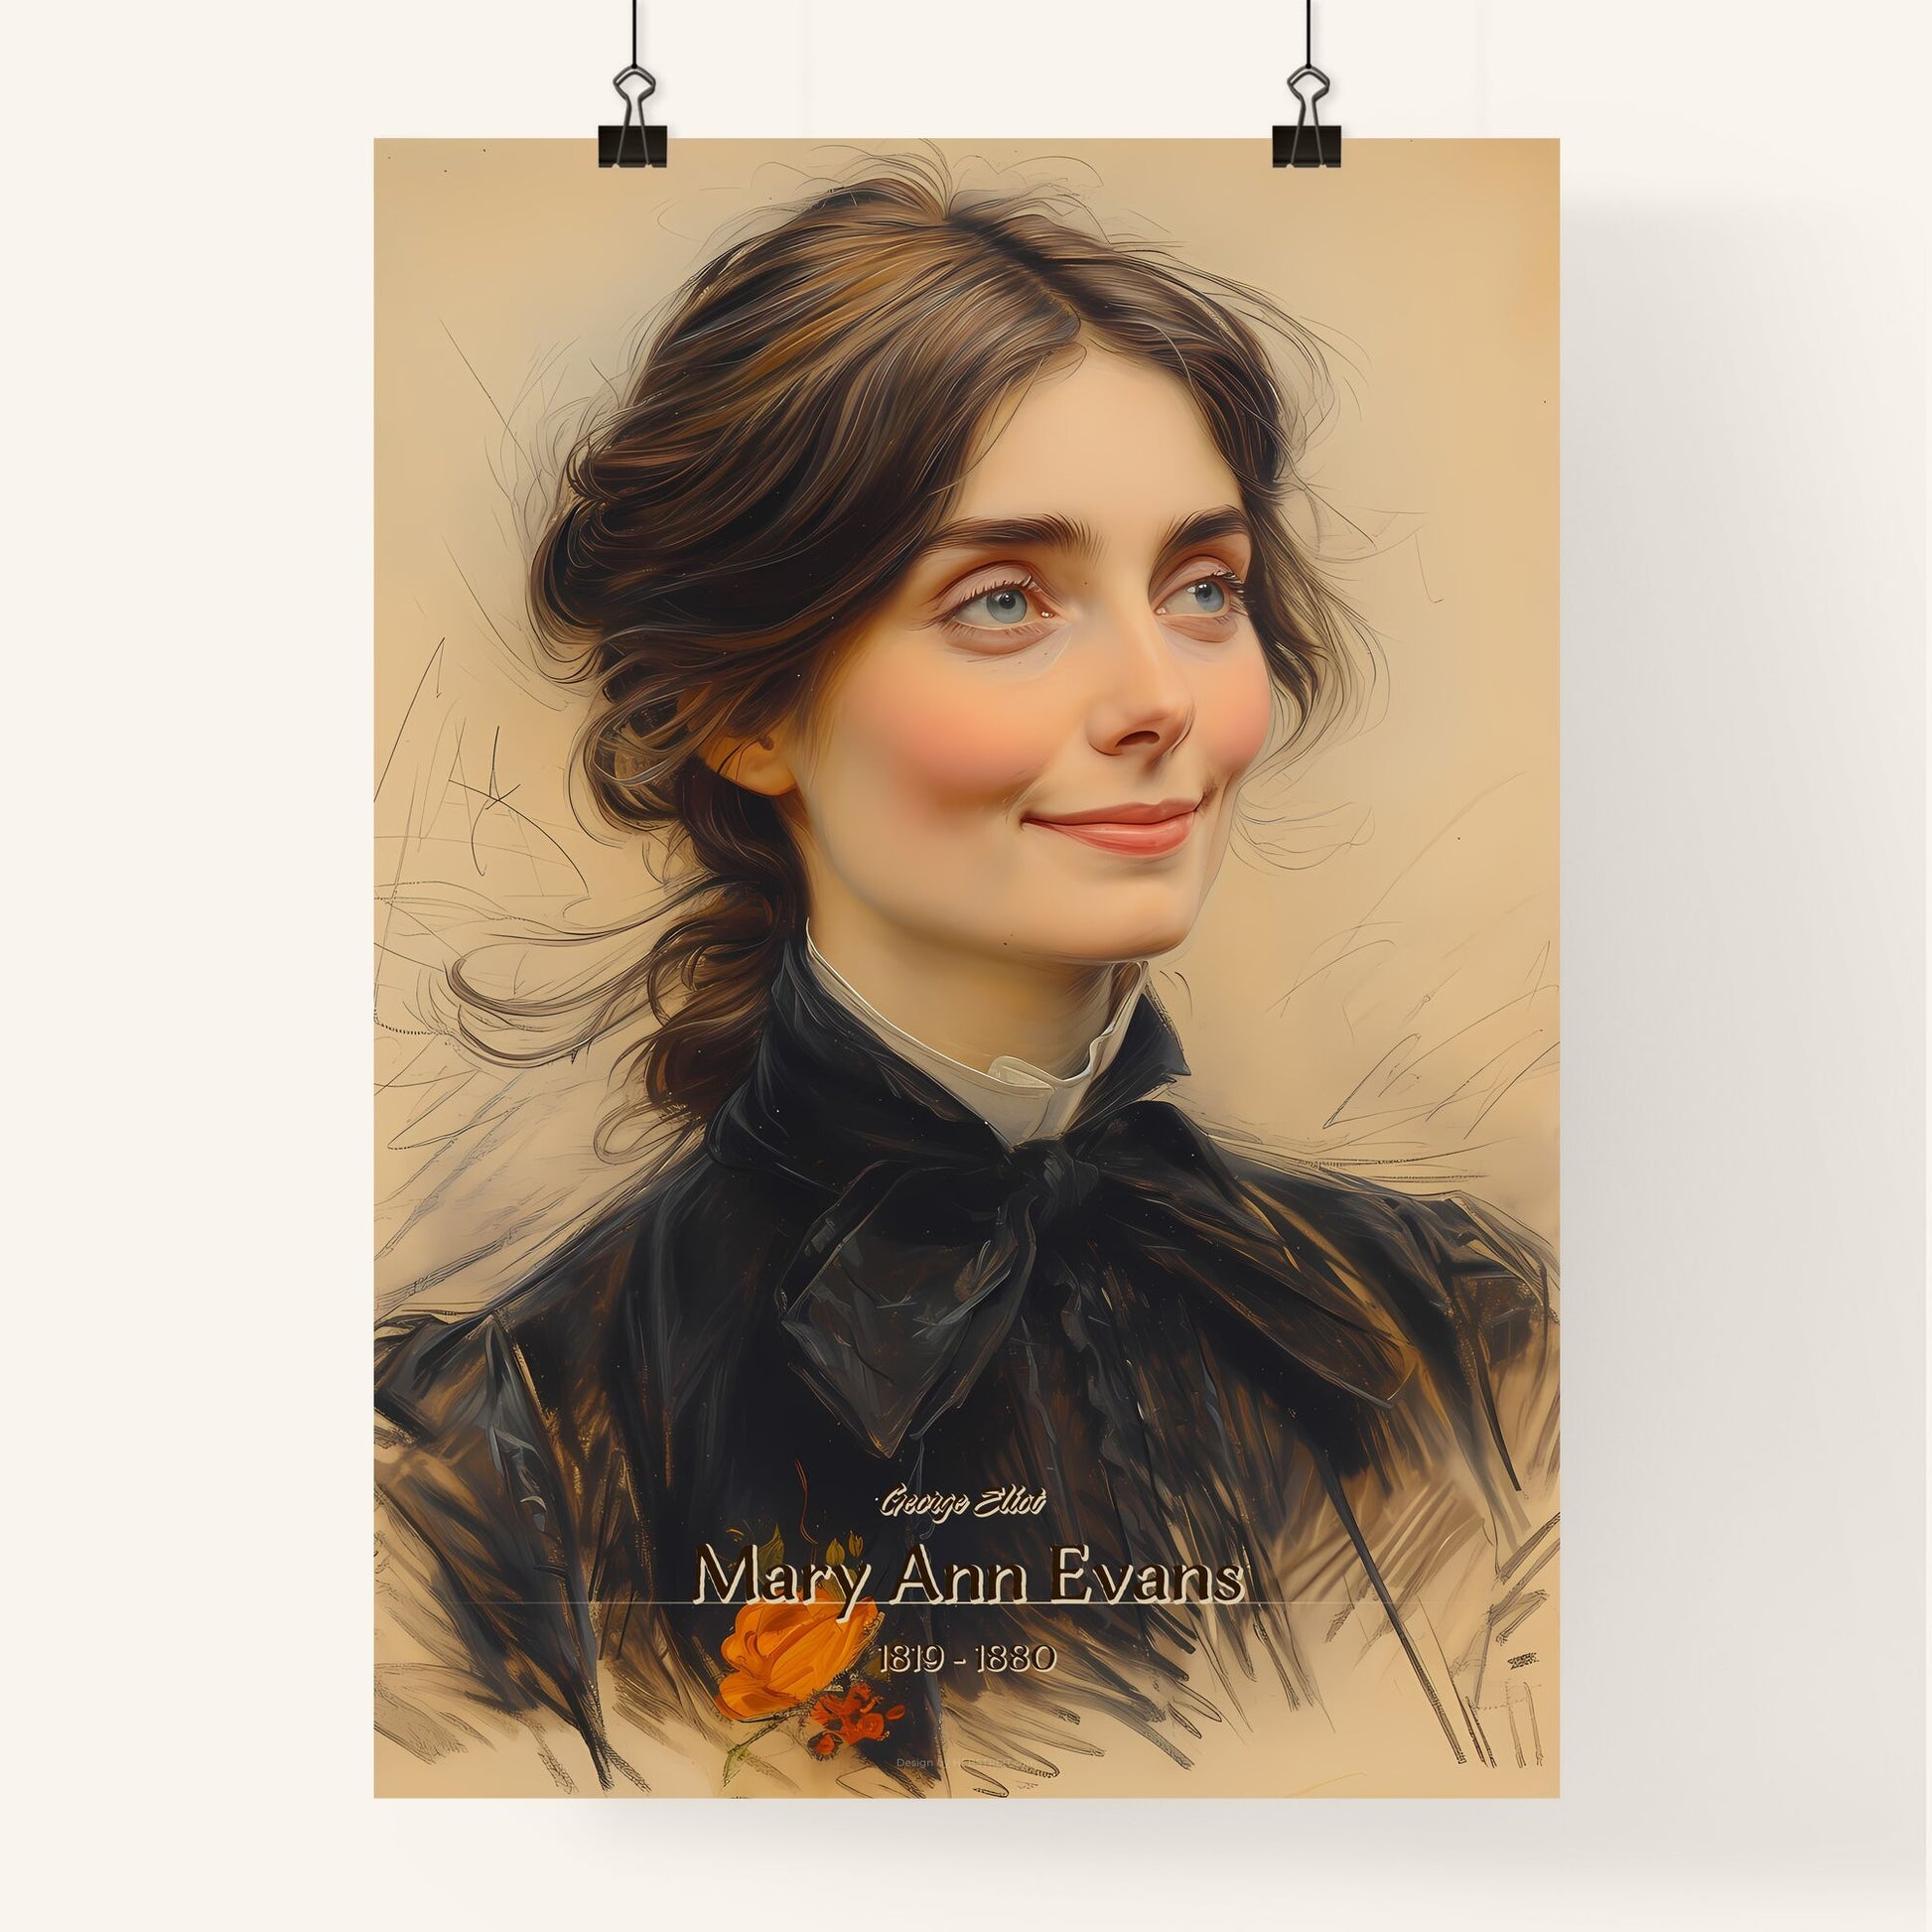 George Eliot, Mary Ann Evans, 1819 - 1880, A Poster of a woman with a black shirt Default Title